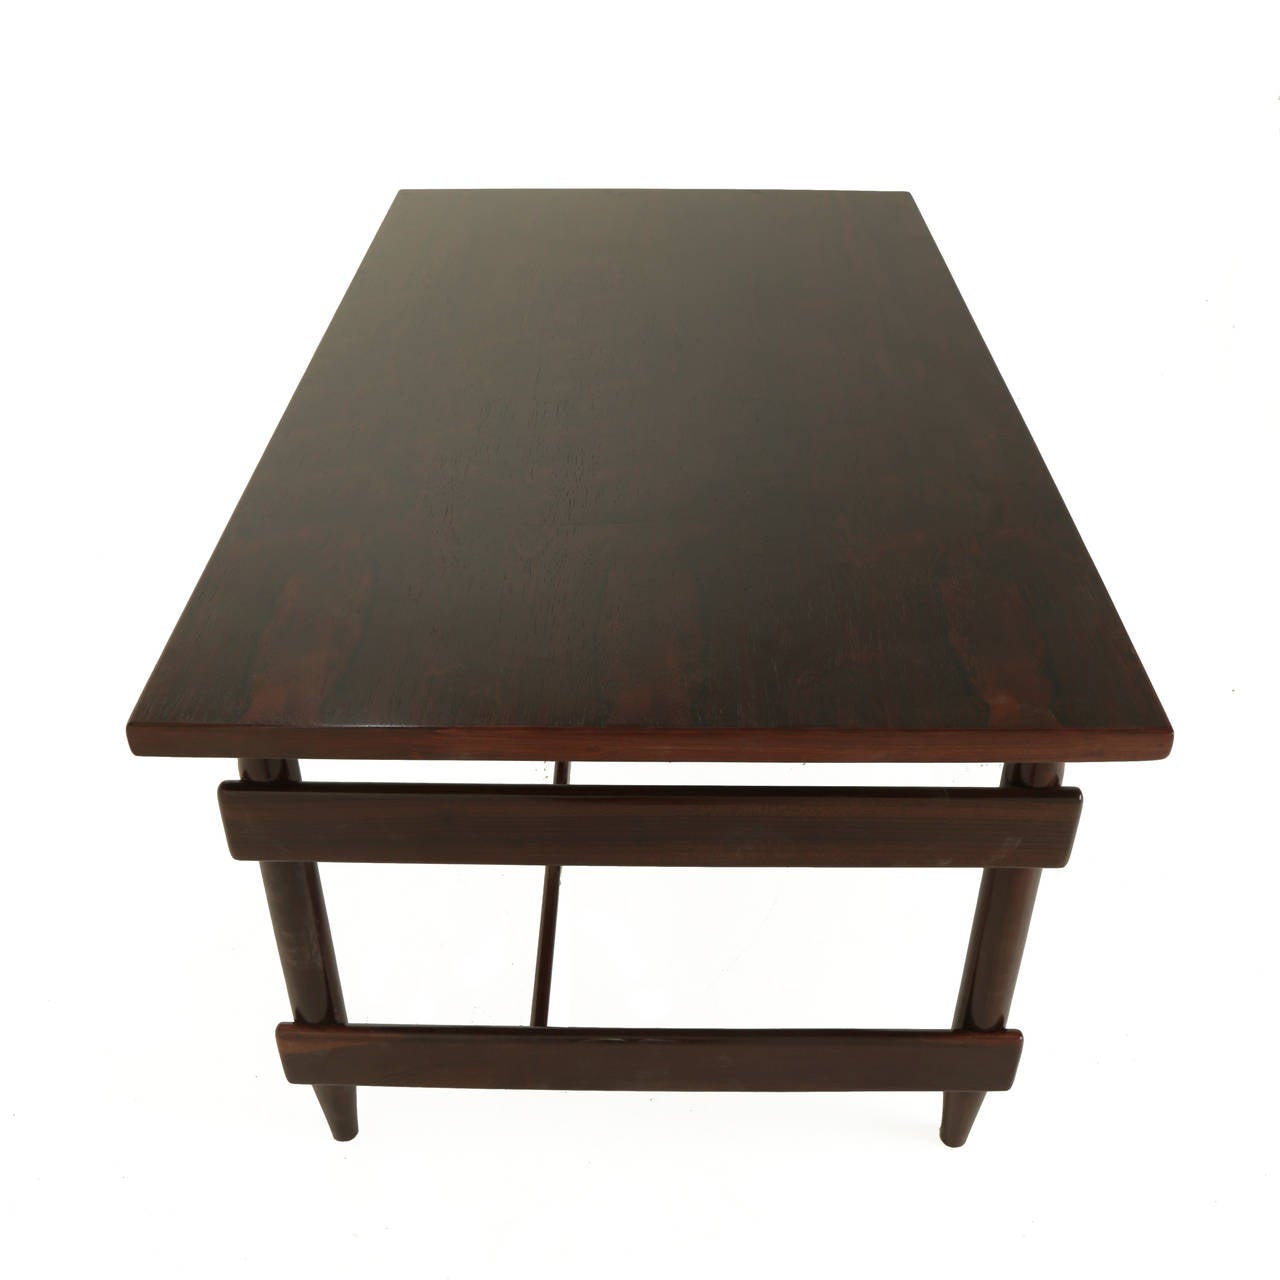 Mid-20th Century Solid Rosewood and Black Leather Desk from Brazil For Sale